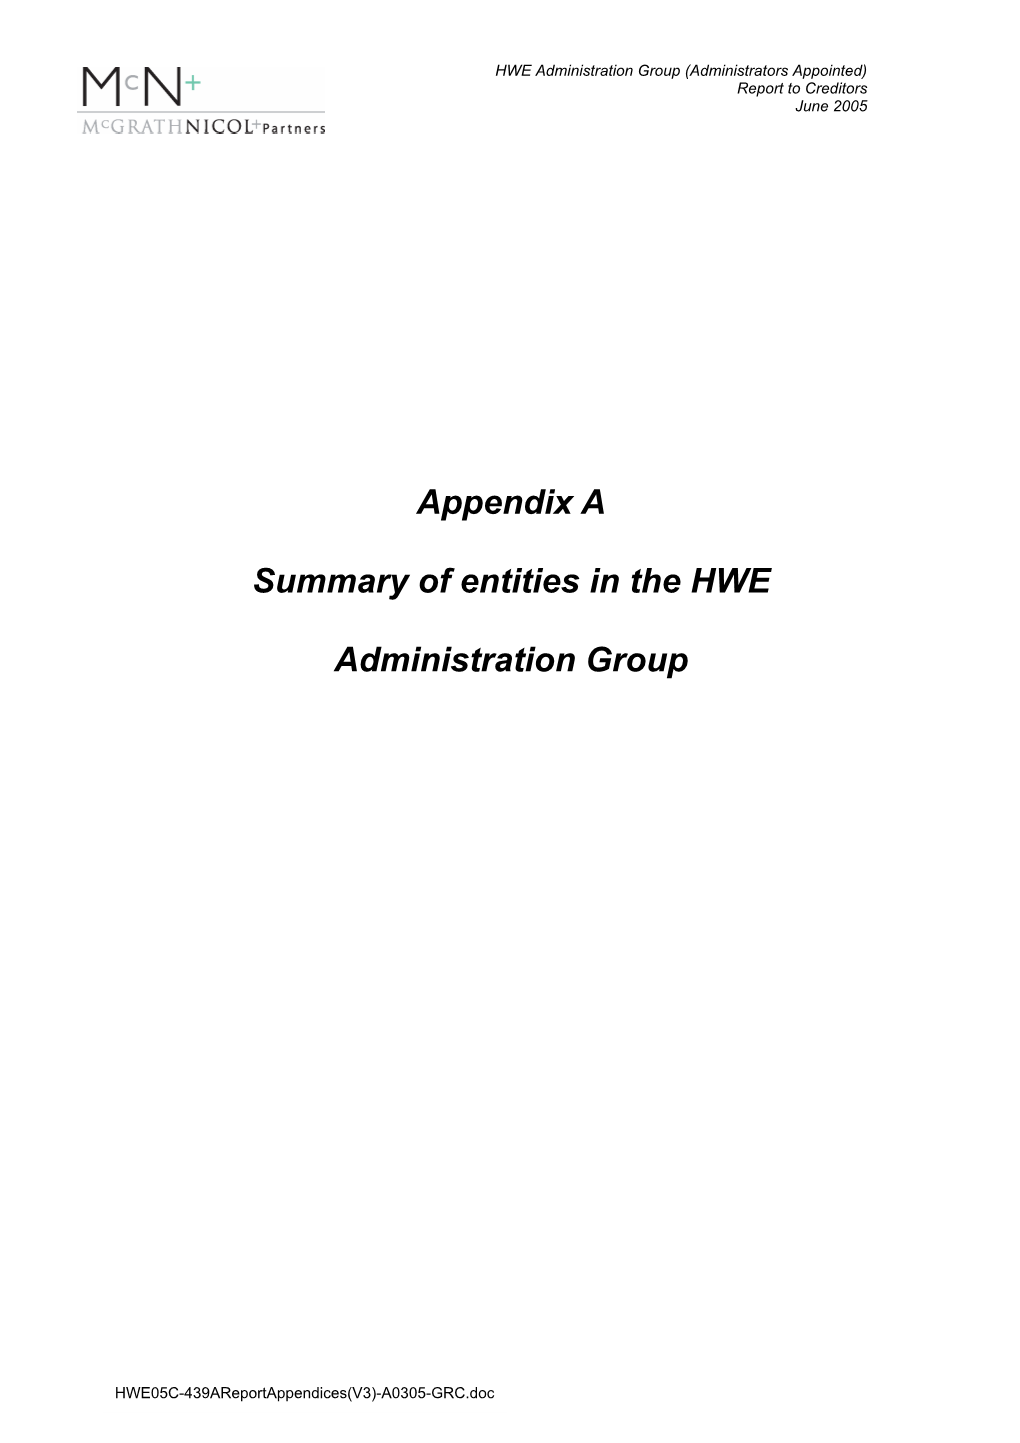 Appendix a Summary of Entities in the HWE